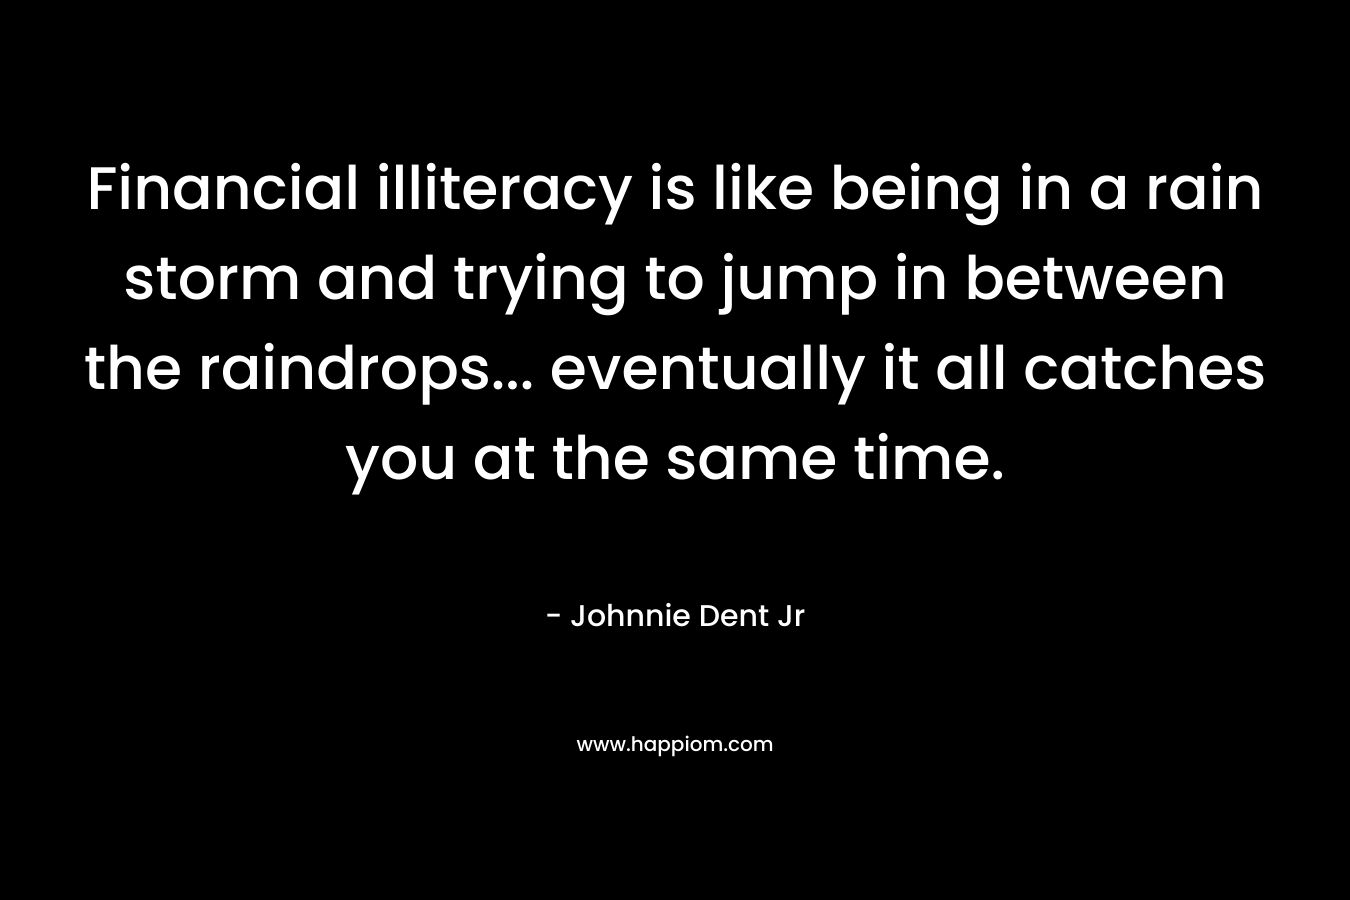 Financial illiteracy is like being in a rain storm and trying to jump in between the raindrops… eventually it all catches you at the same time. – Johnnie Dent Jr